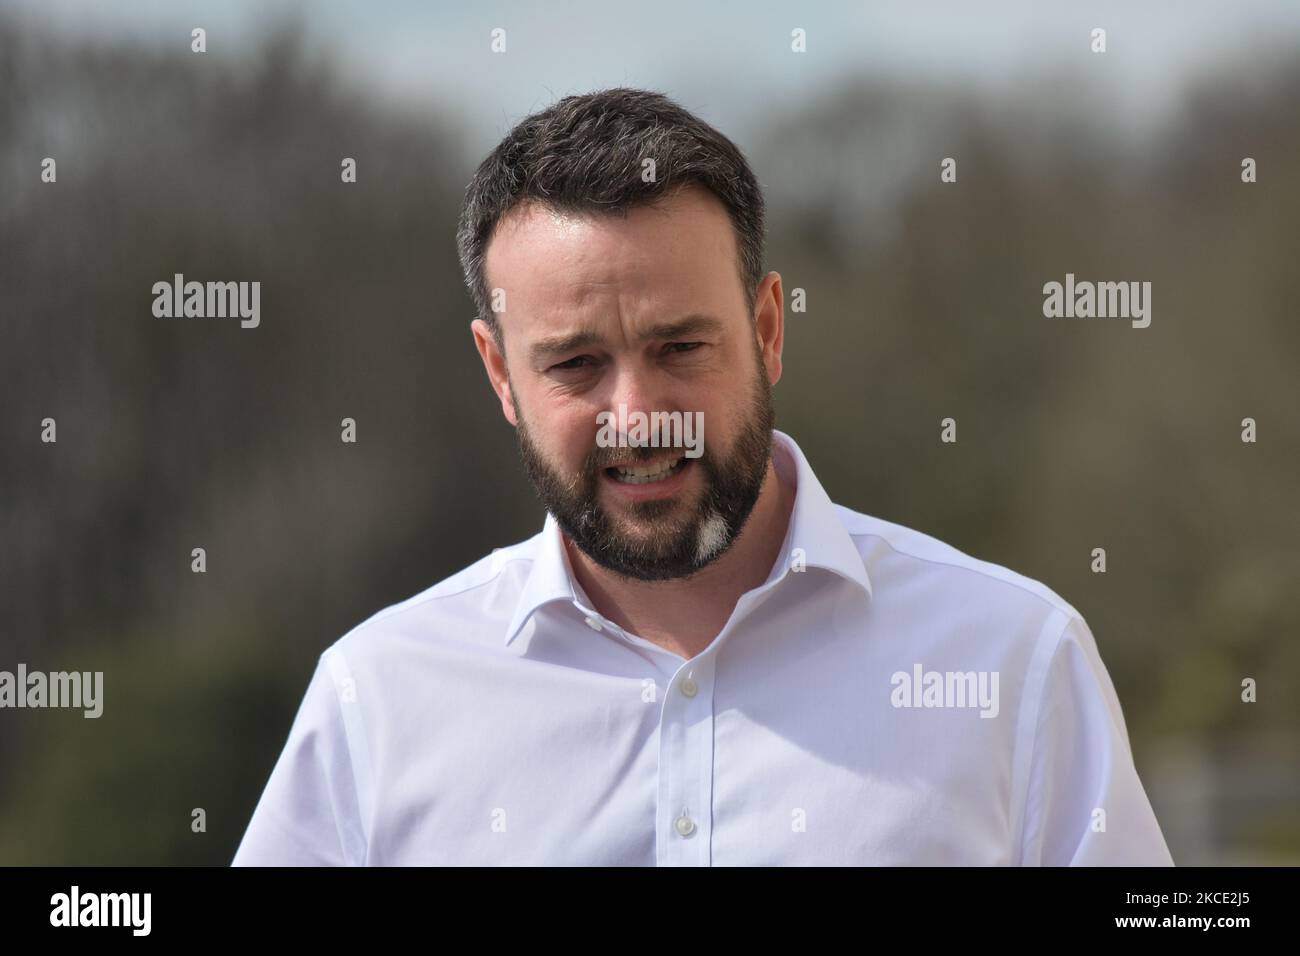 Social Democratic and Labour Party (SDLP) leader Colum Eastwood speaks outside Stormont in Belfast, following a loyalist protest in the city against Brexit's Northern Ireland Protocol. On Monday, April 19, 2021, in Belfast, Northern Ireland (Photo by Artur Widak/NurPhoto) Stock Photo